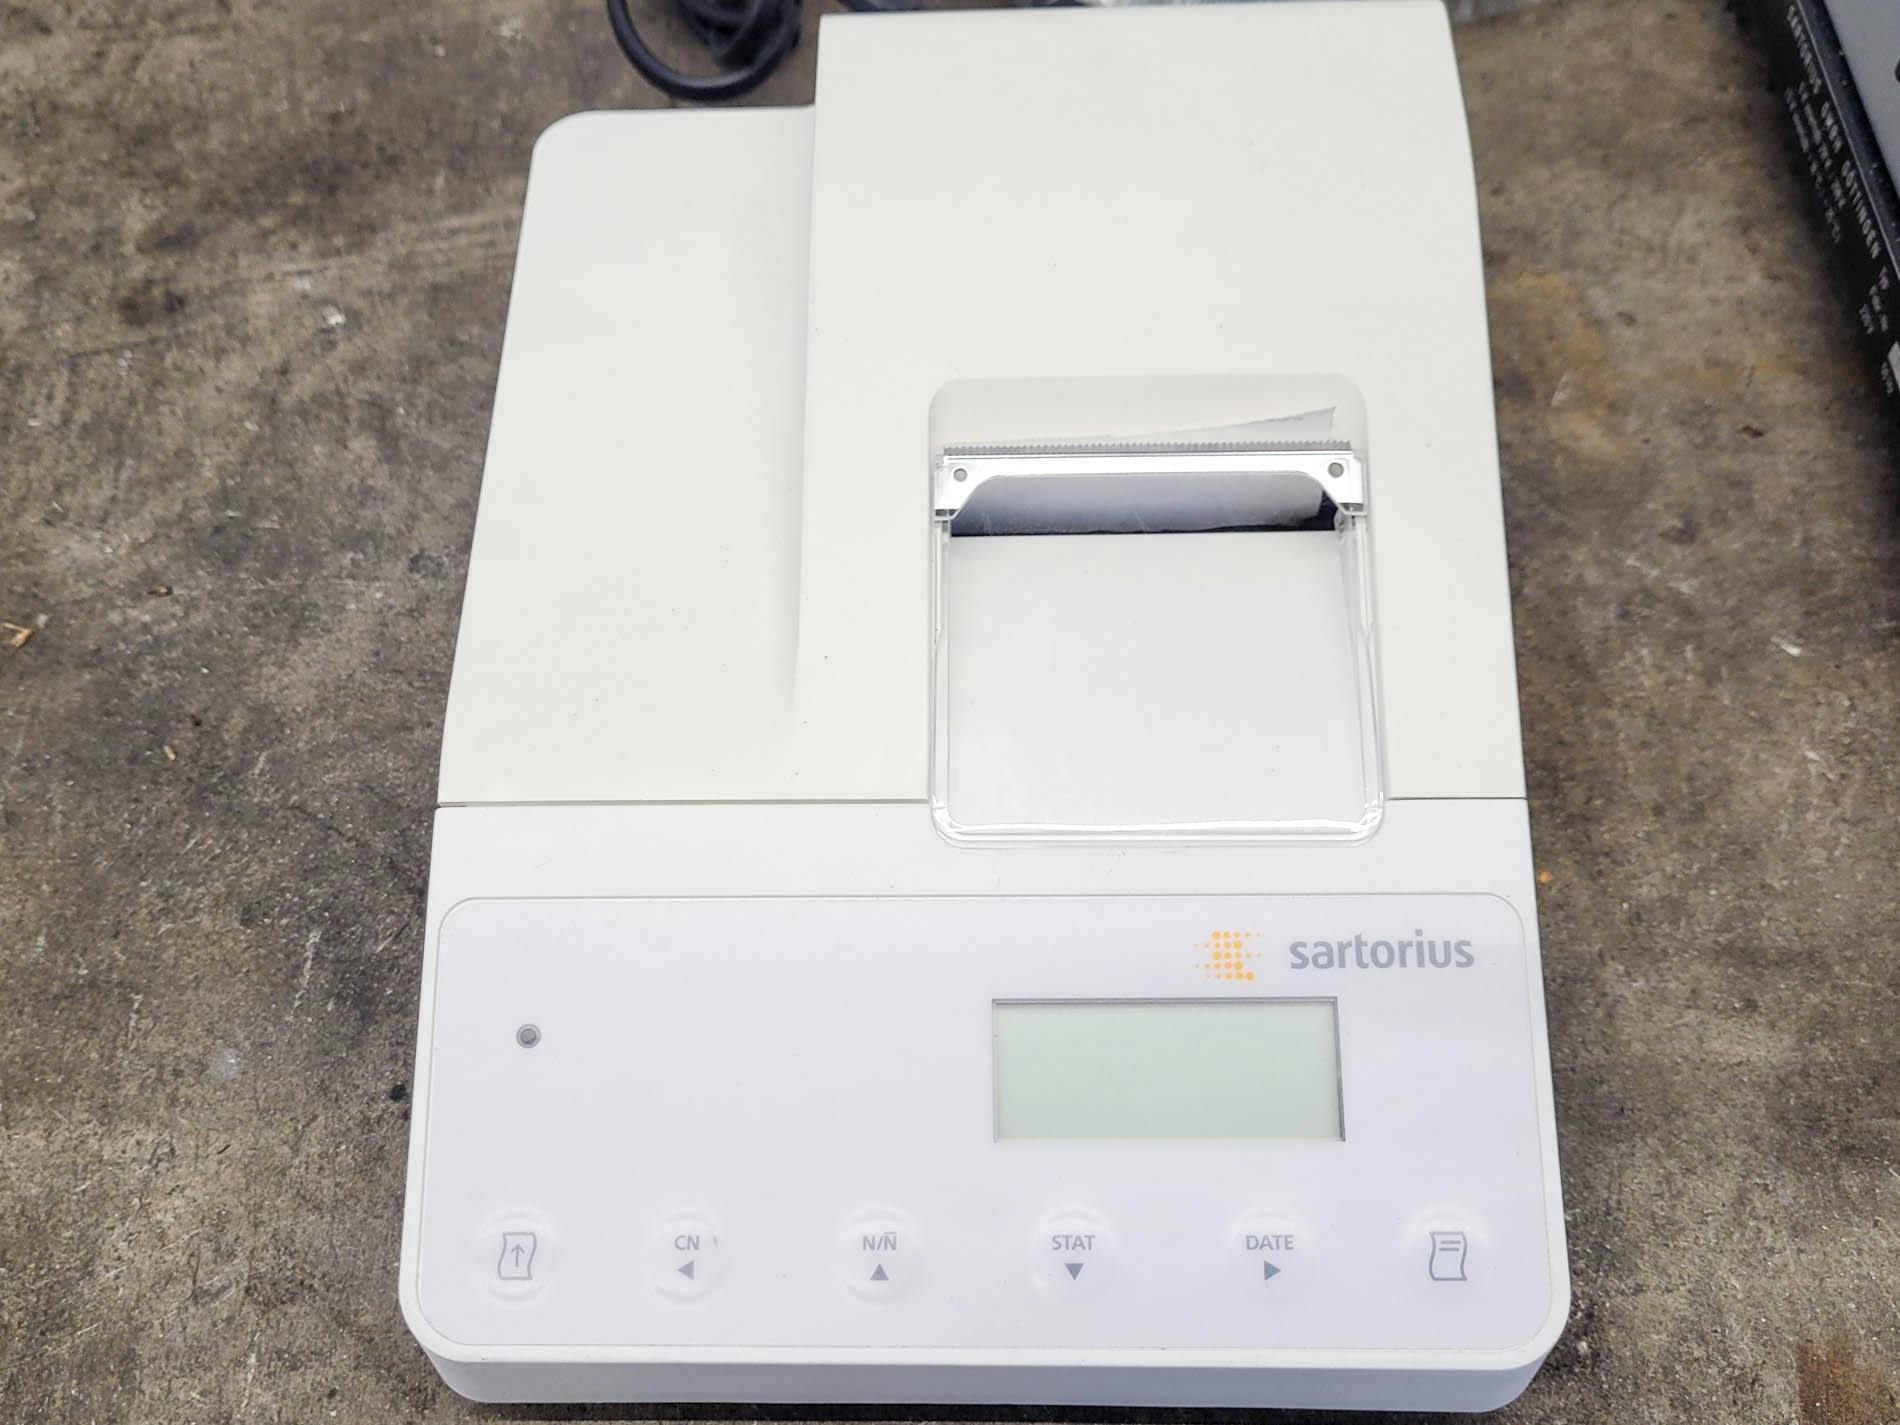 Sartorius R160P-*D1 "weighing scale" - Miscellaneous - image 9